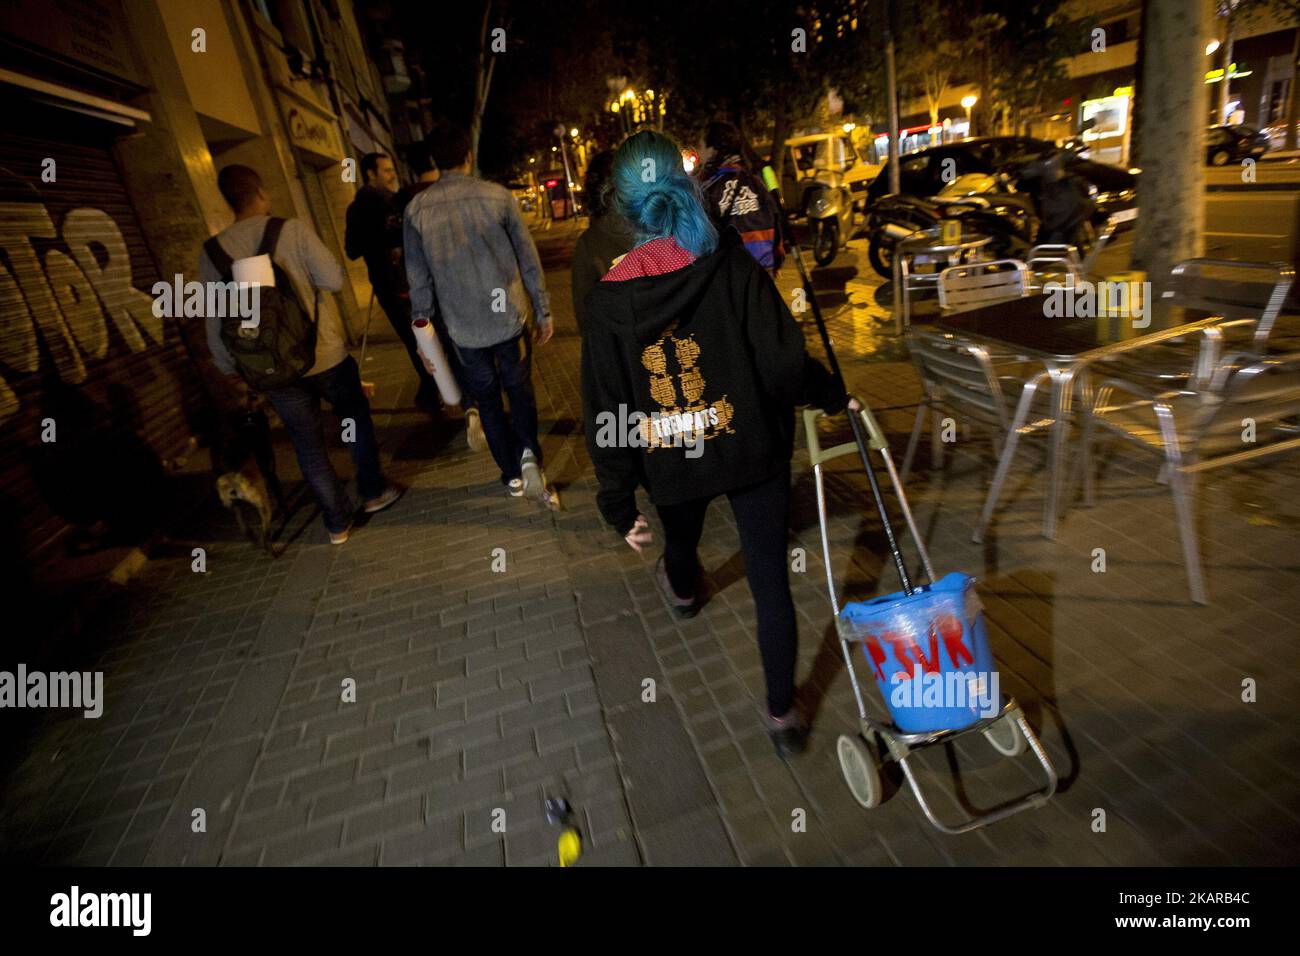 Members of the Popular Unity Candidature (CUP), distribute campaign posters in the popular district of Nou Barris, Barcelona, asking for the 'Yes' vote in the referendum of independence of Catalonia on October 1, in Barcelona on September 17, 2017 (Photo by Miquel Llop/NurPhoto) Stock Photo